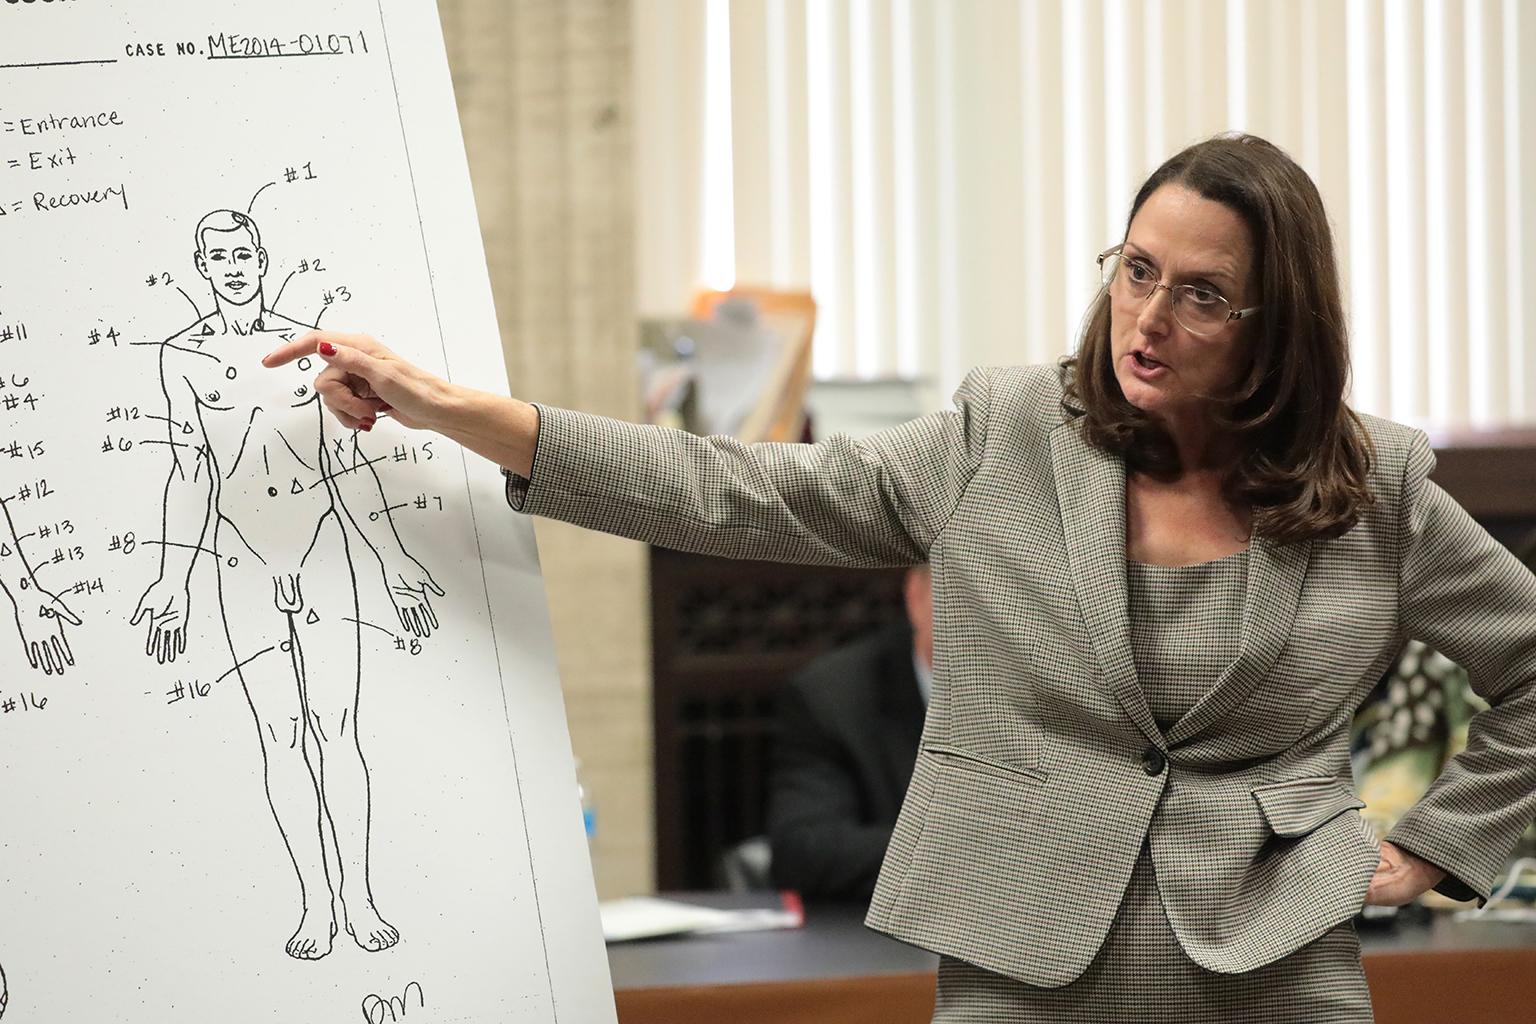 Prosecutor Jody Gleason points to a medical examiner's diagram showing the wounds to Laquan McDonald on Monday, Sept. 24, 2018. (Antonio Perez / Chicago Tribune / Pool)